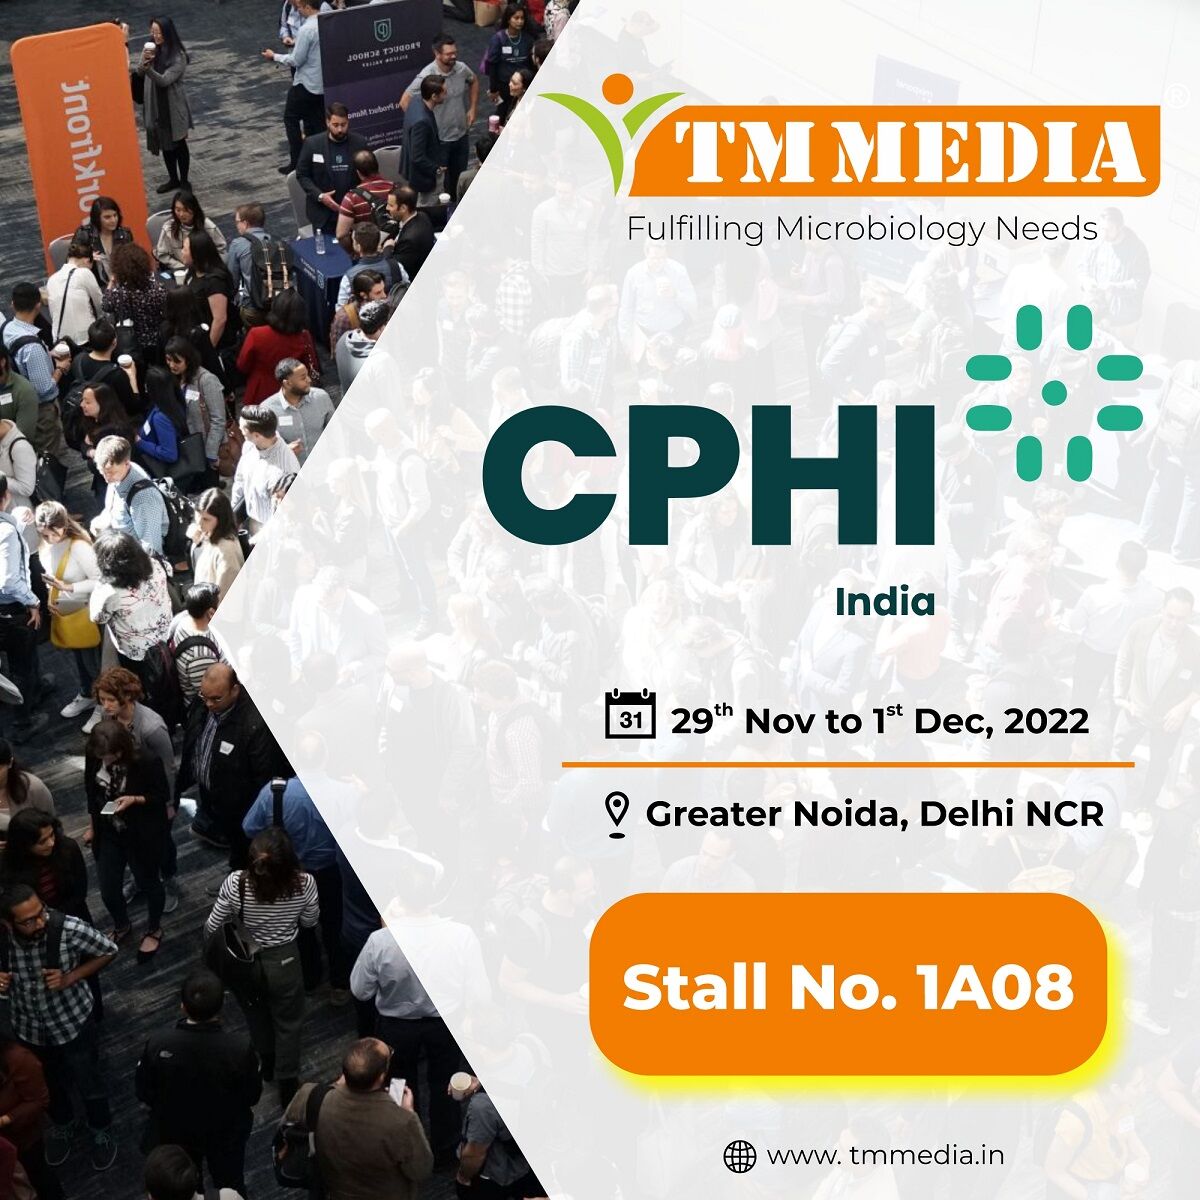 We are delighted to share that we are Exhibiting at #CPHI. You can visit us at stall no. 1A08

#cphi2022 #cphiexhibition2022 #greaternoida #tmmedia #microbiology #clinicalmicrobiology #clinicalresearch #culturemedia #planttissueculturemedia #readytousemedia #biologicalmediabases